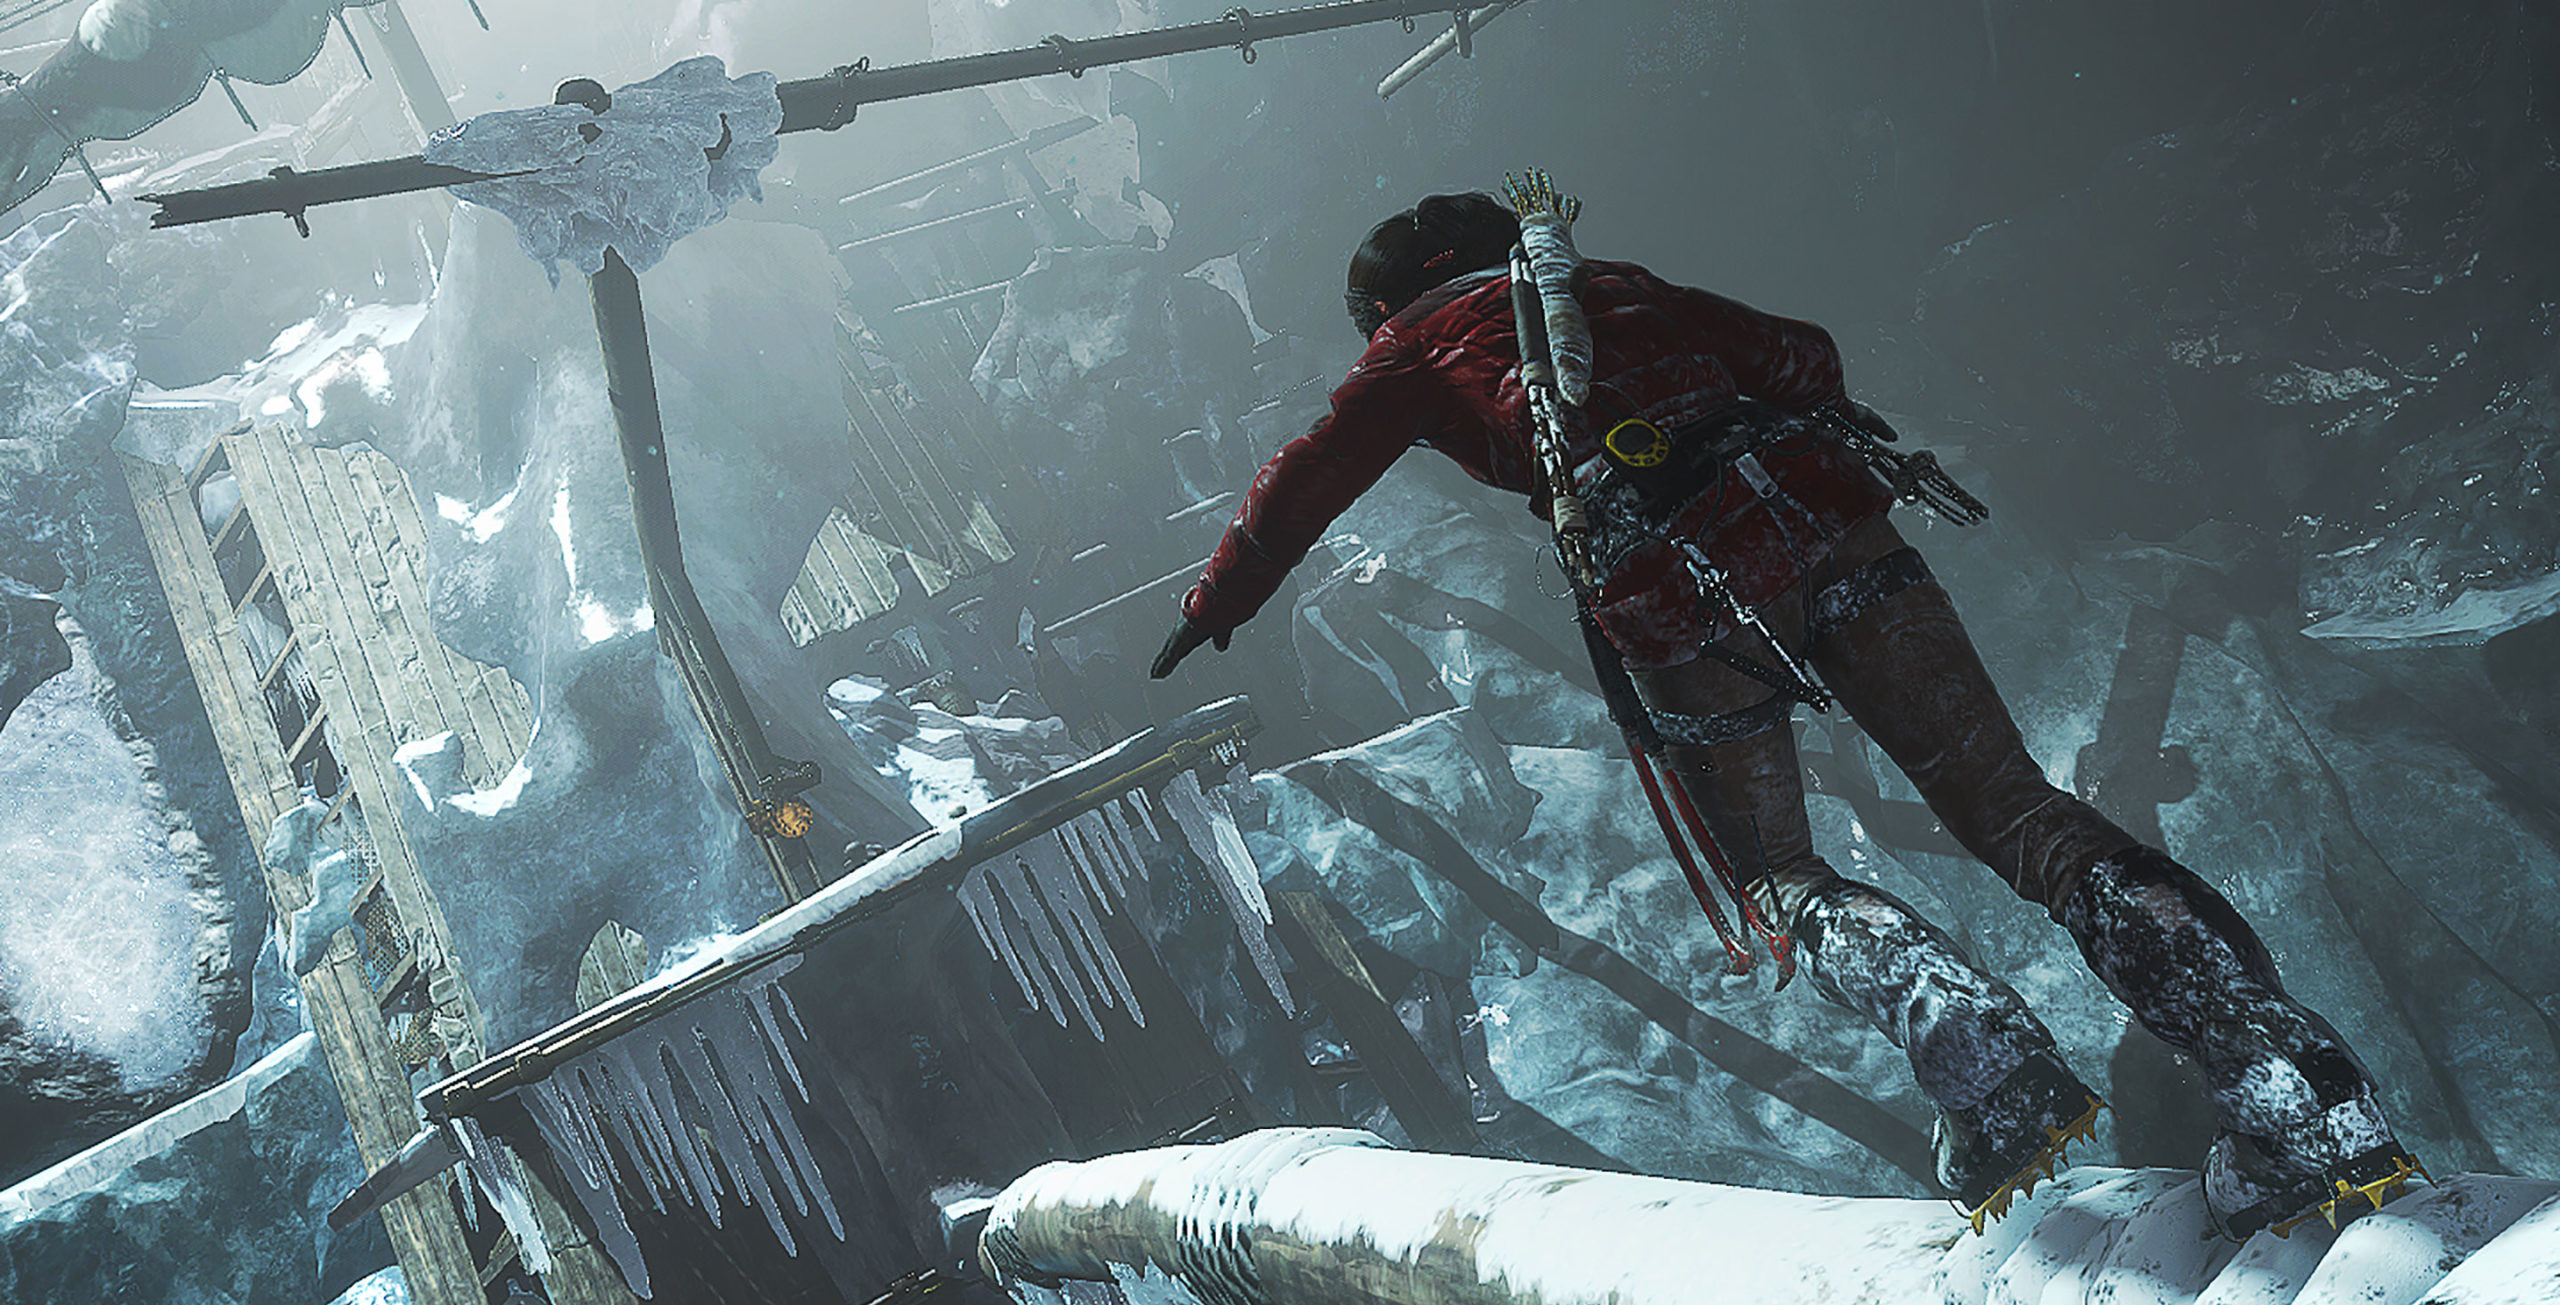 Lara carefully treads across the frozen stern of a derelict ship, which has made its way into a huge, icy cavern.